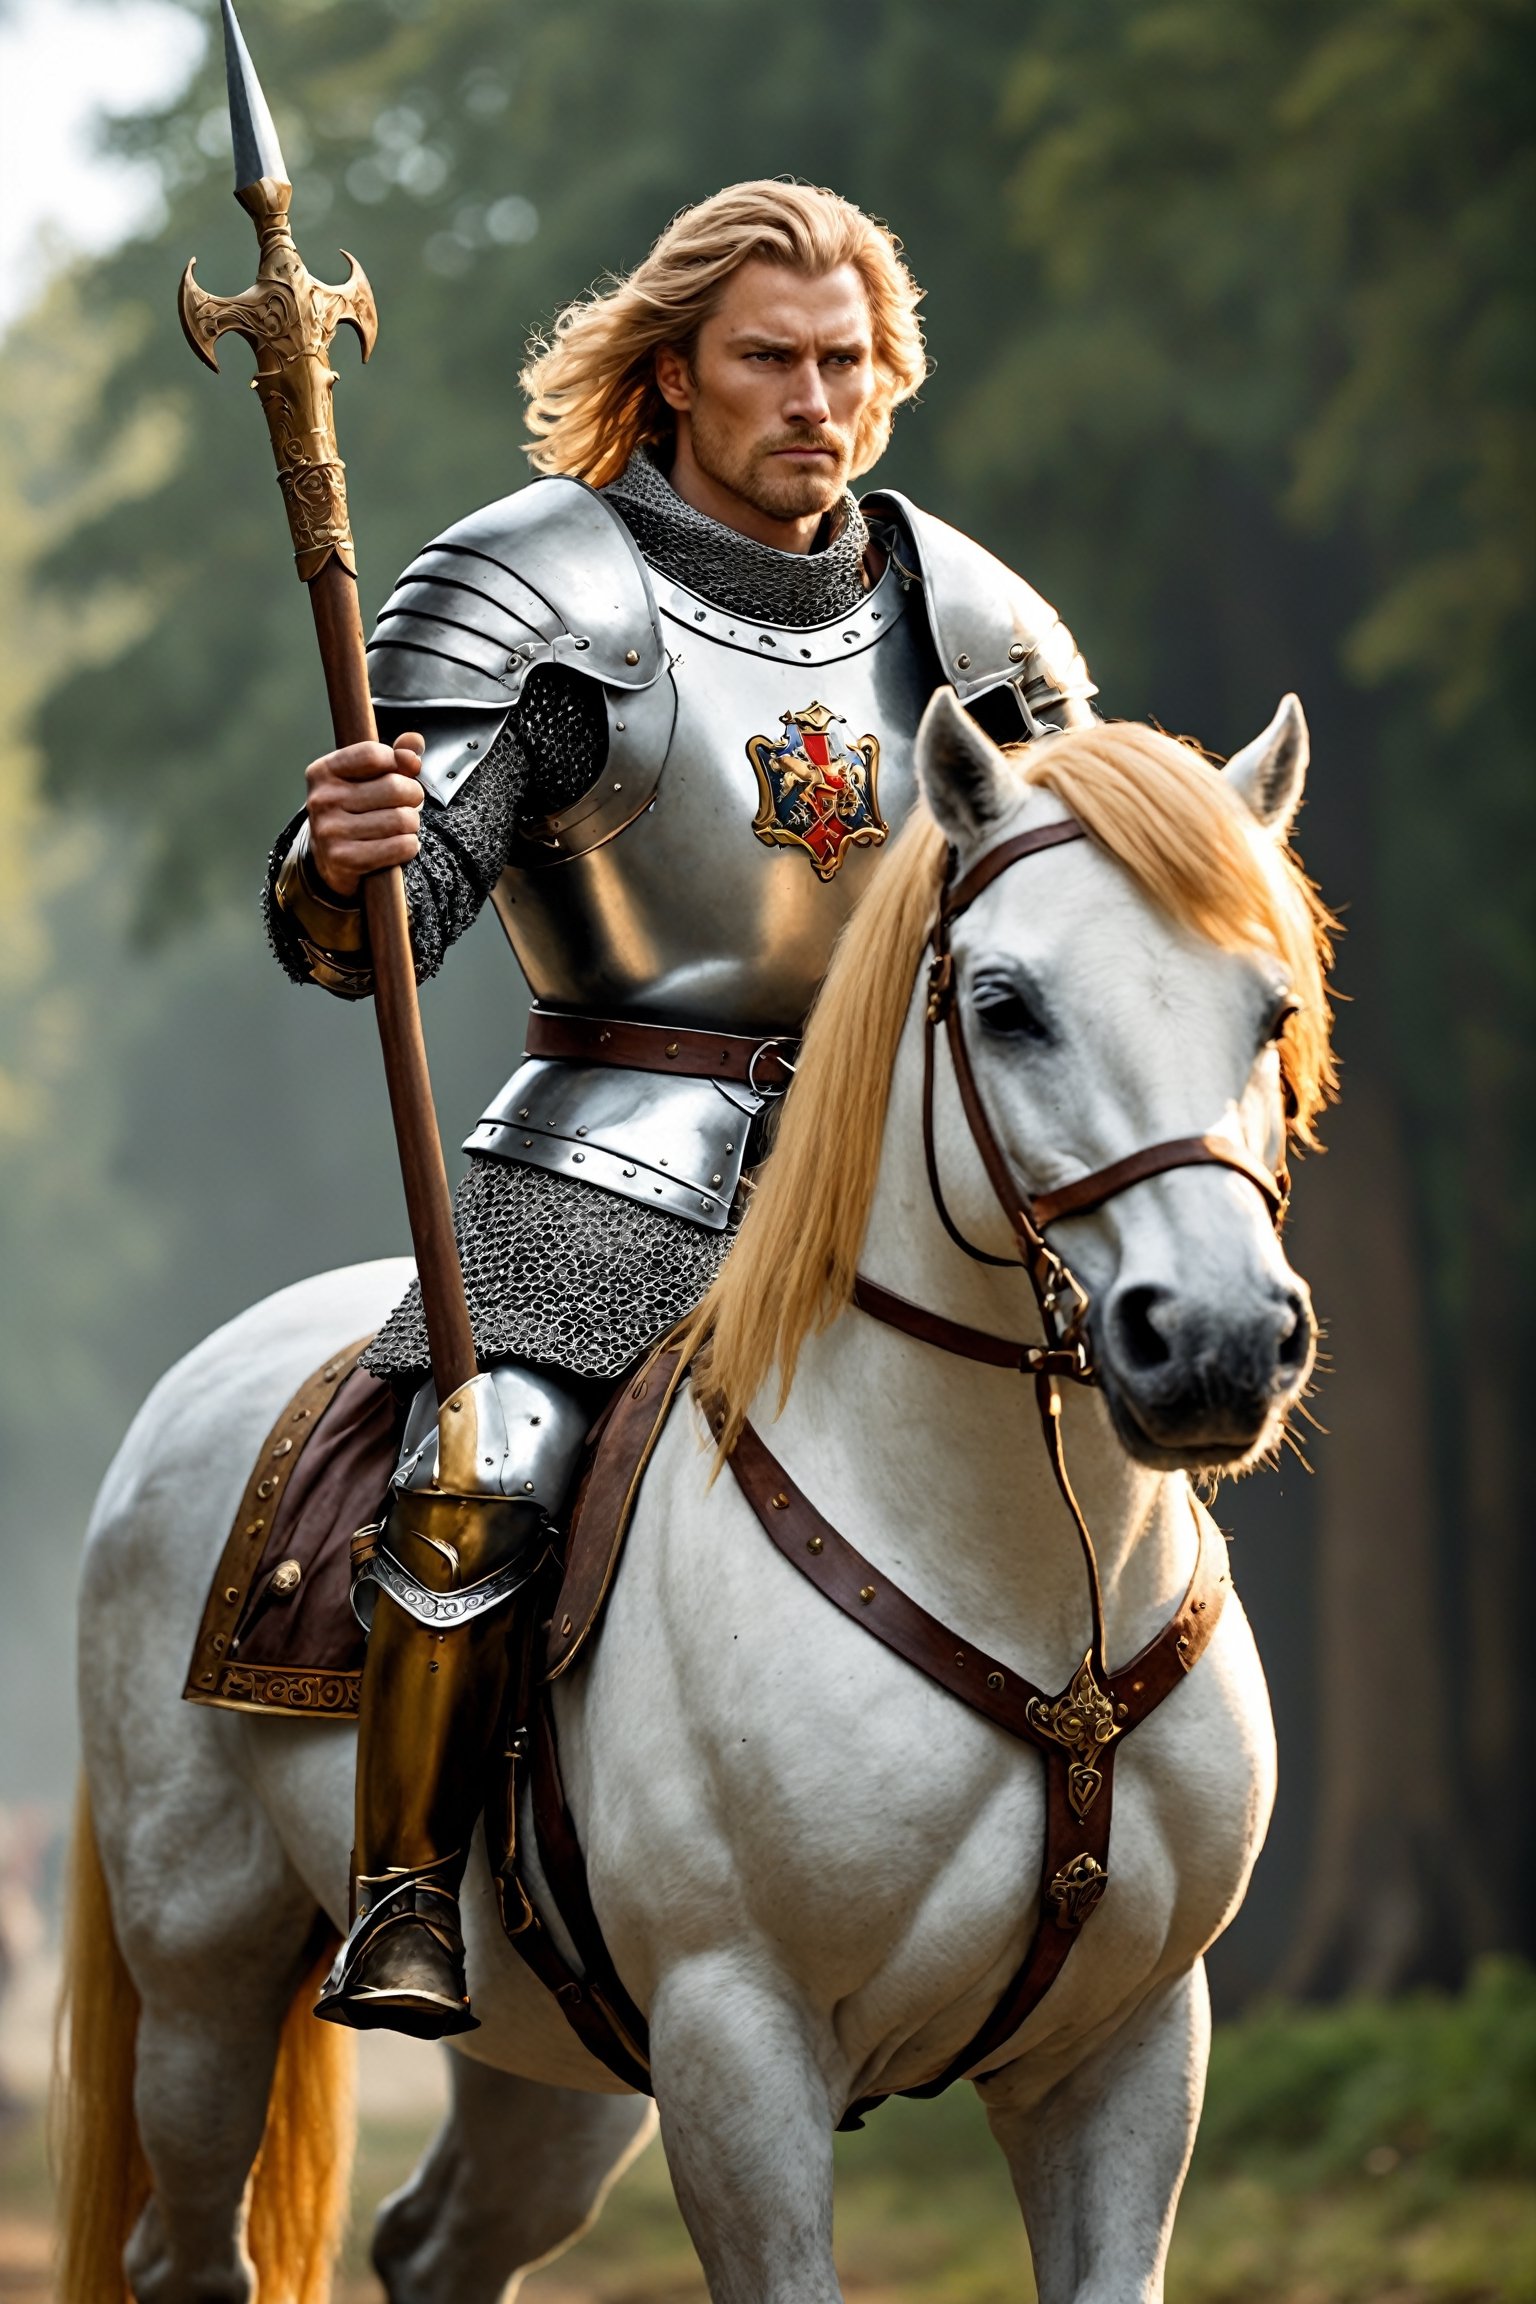  Richard the Lionheart, mounted on a majestic steed, leading his troops with regal authority. Clad in shining armor adorned with the lion crest, he embodies strength and courage on the battlefield. With golden hair flowing and a fierce gaze, he inspires awe among allies and fear in enemies. Richard's lionhearted spirit epitomizes knightly virtue and leadership, a true lion of the battlefield.",photo_b00ster,DonM1uth3rXL